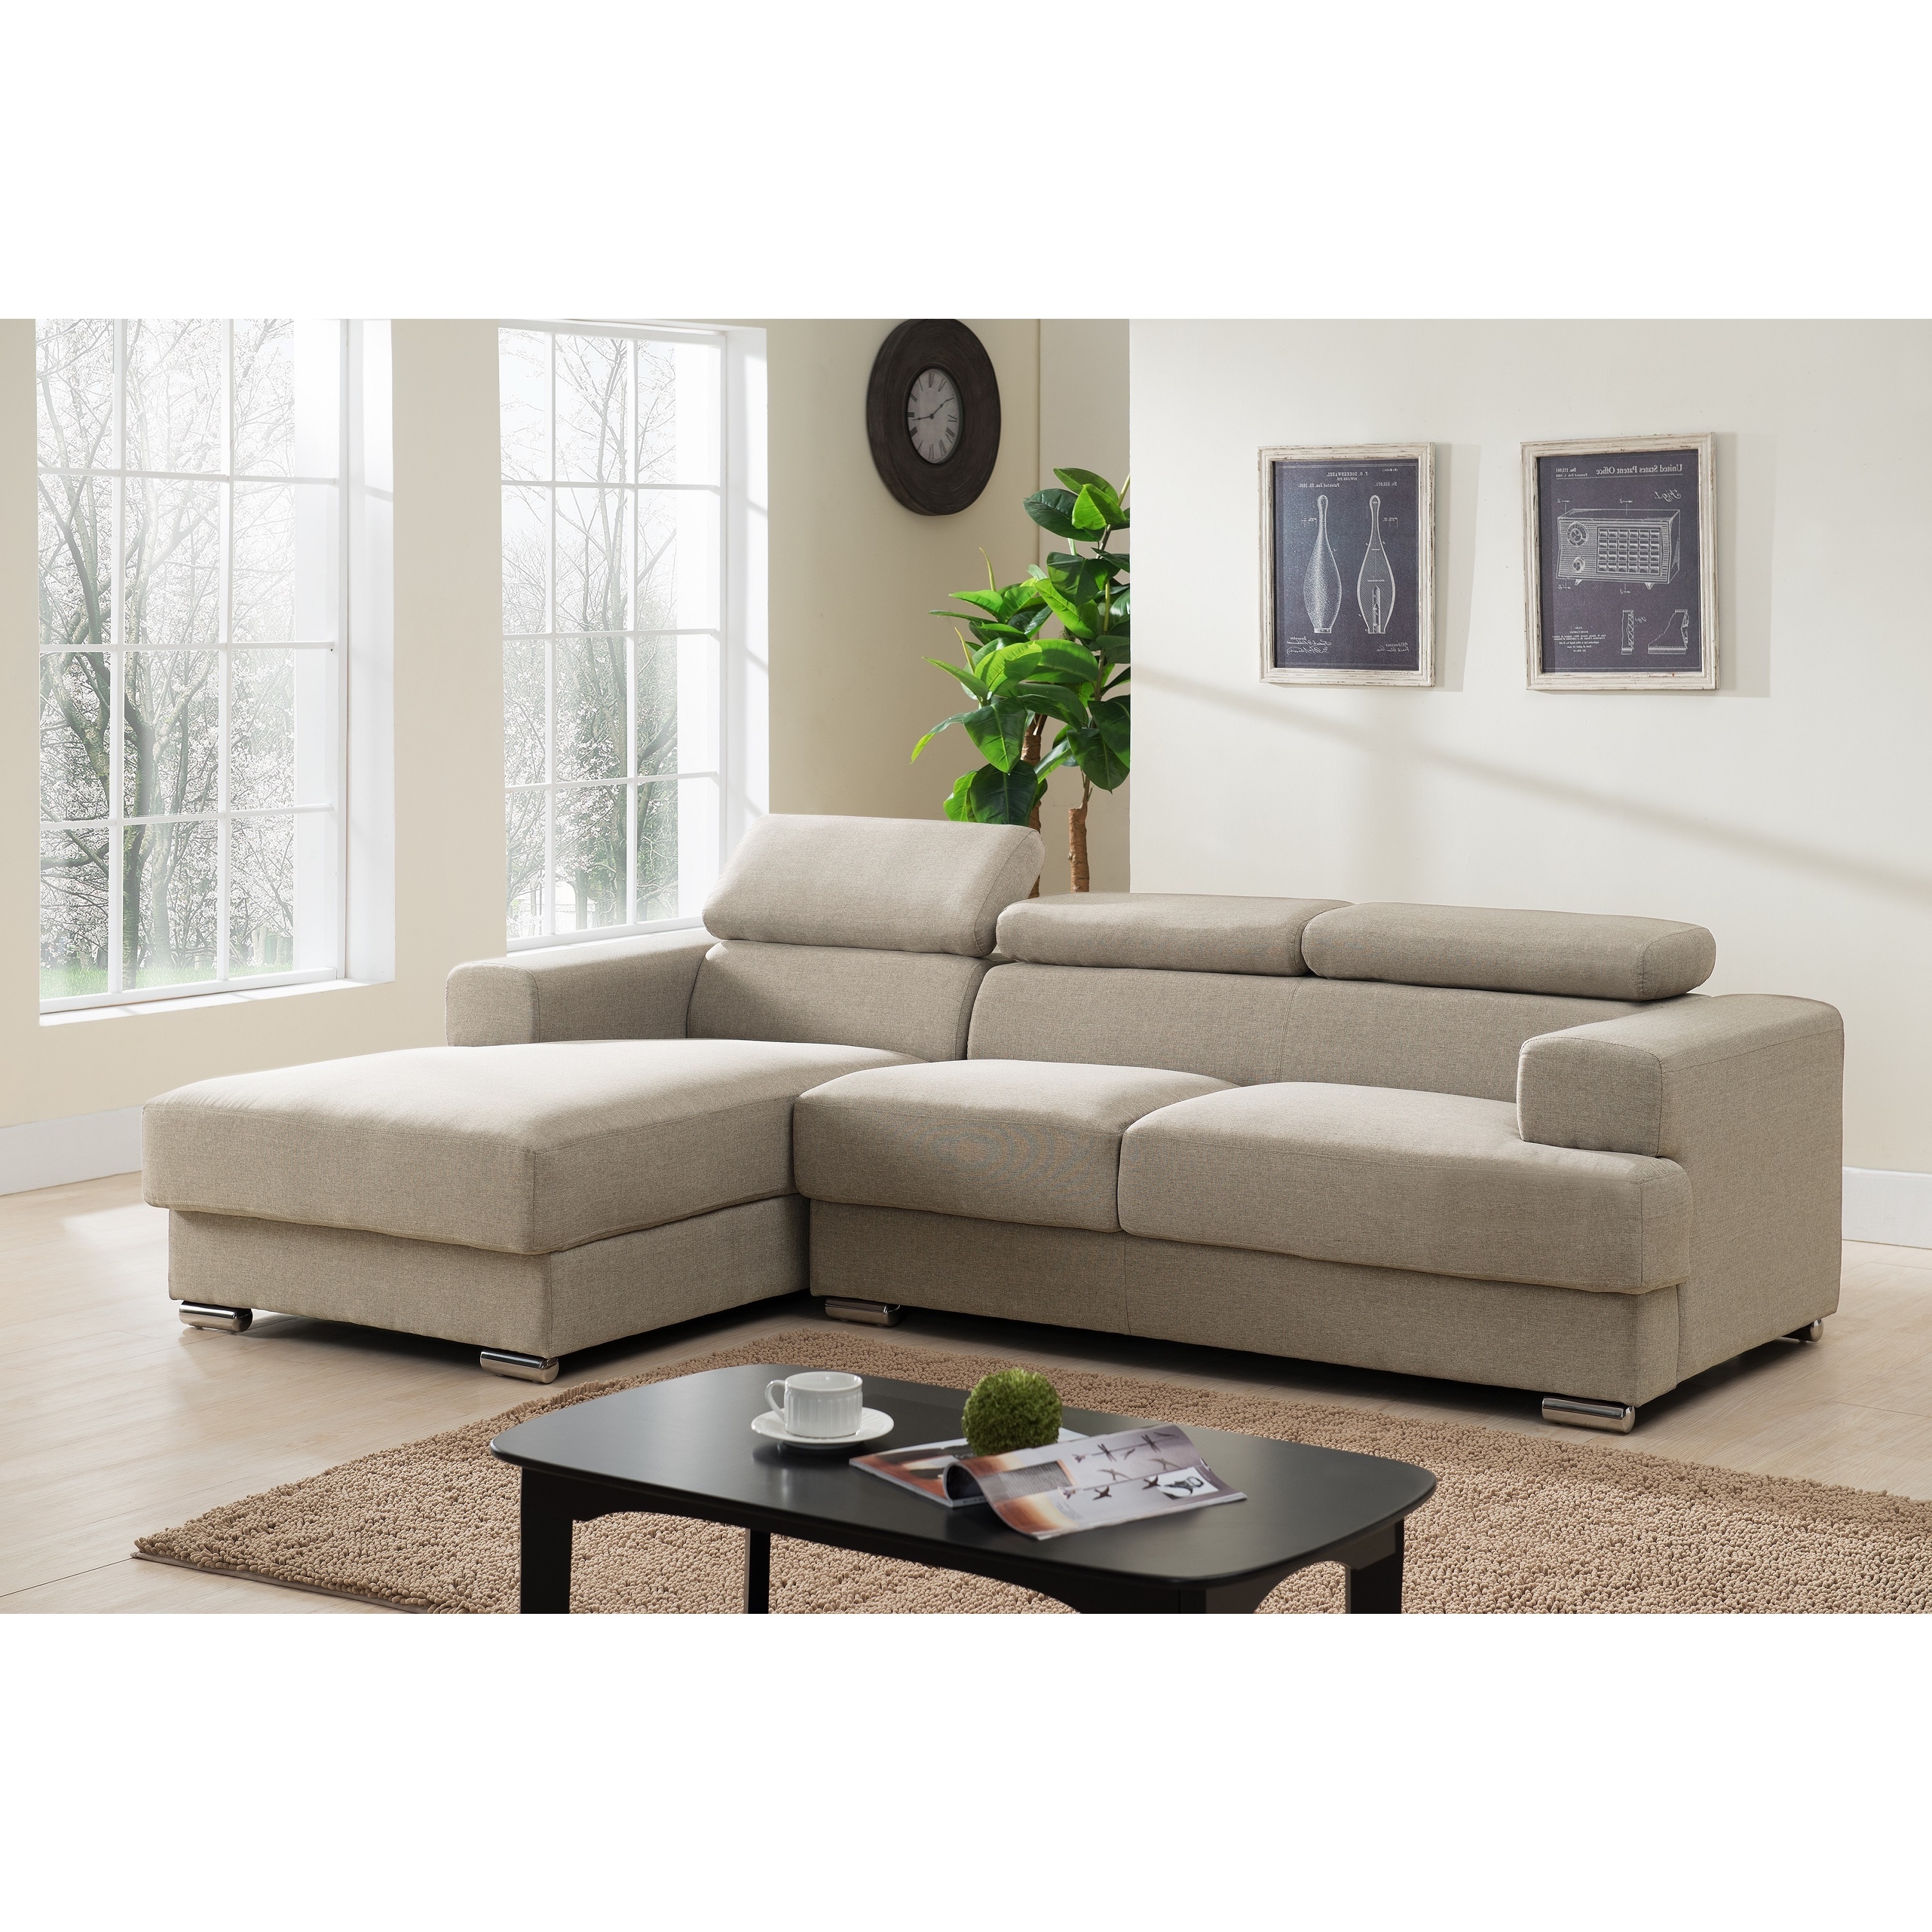 Shop Black Friday Deals On Gabriel Fabric Contemporary Sectional Sofa Set Overstock 11602430